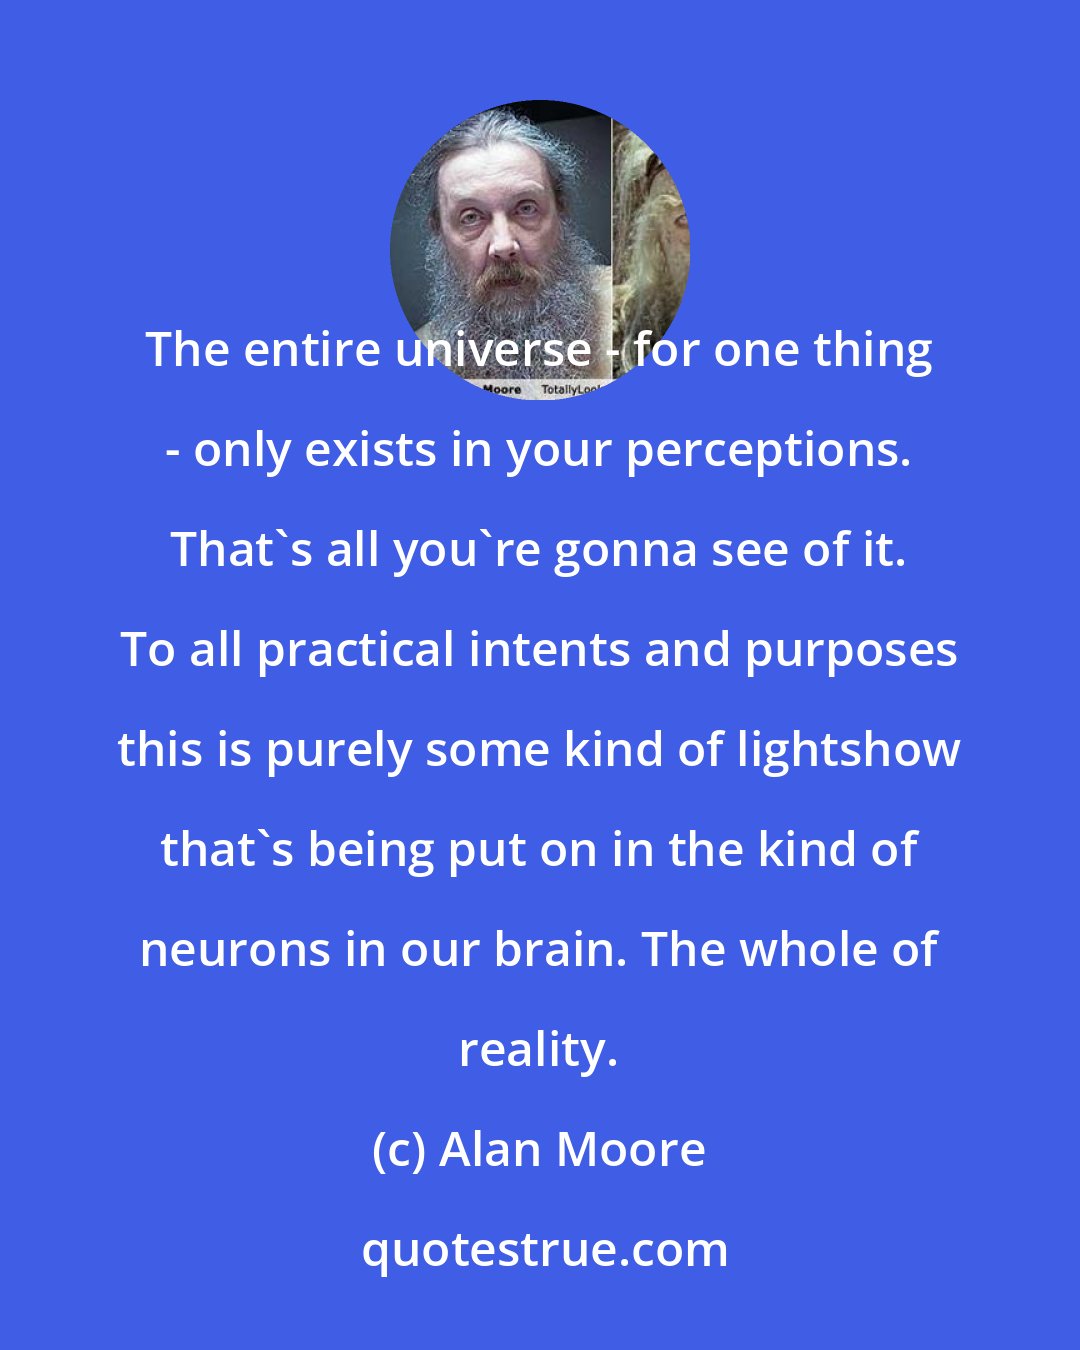 Alan Moore: The entire universe - for one thing - only exists in your perceptions. That's all you're gonna see of it. To all practical intents and purposes this is purely some kind of lightshow that's being put on in the kind of neurons in our brain. The whole of reality.